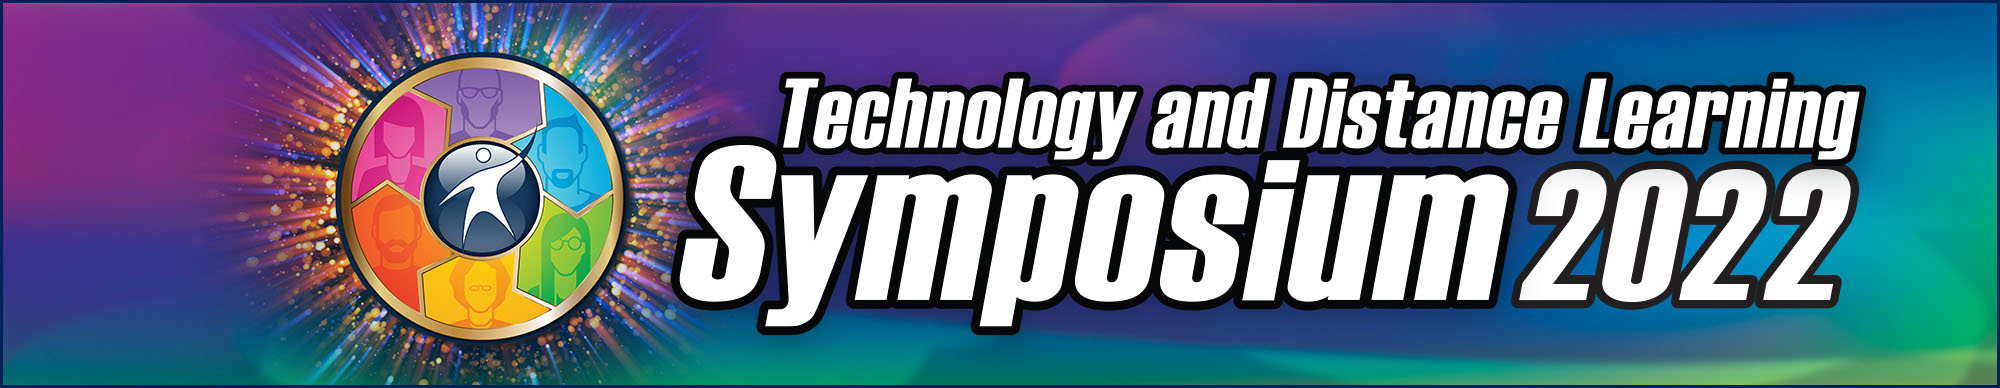 Technology and  Distance Learning Symposium banner